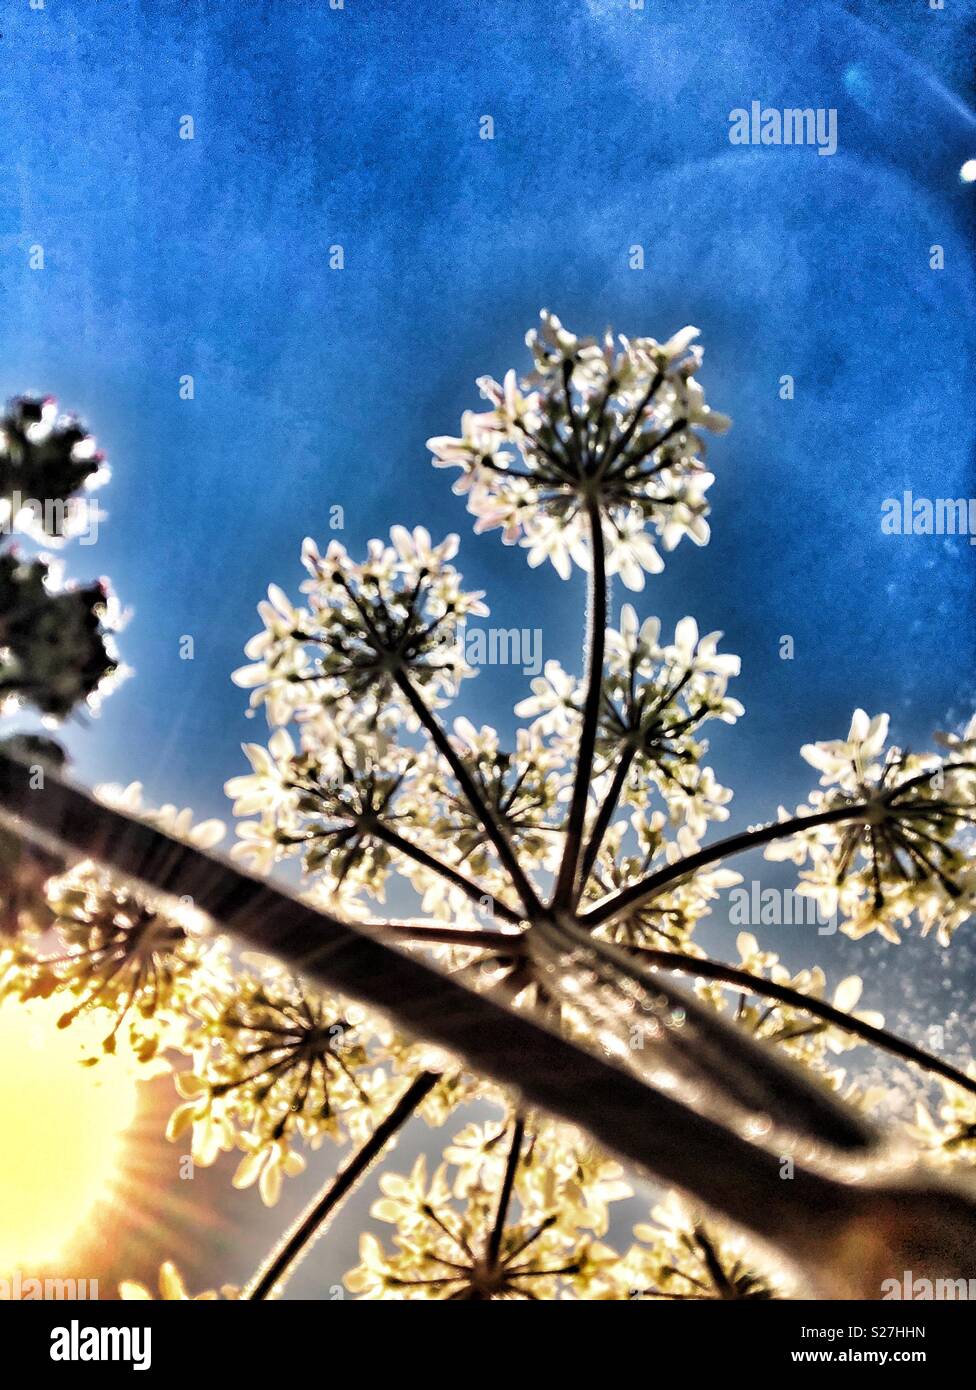 Umbellifer from below with sunburst- summer flowers Stock Photo